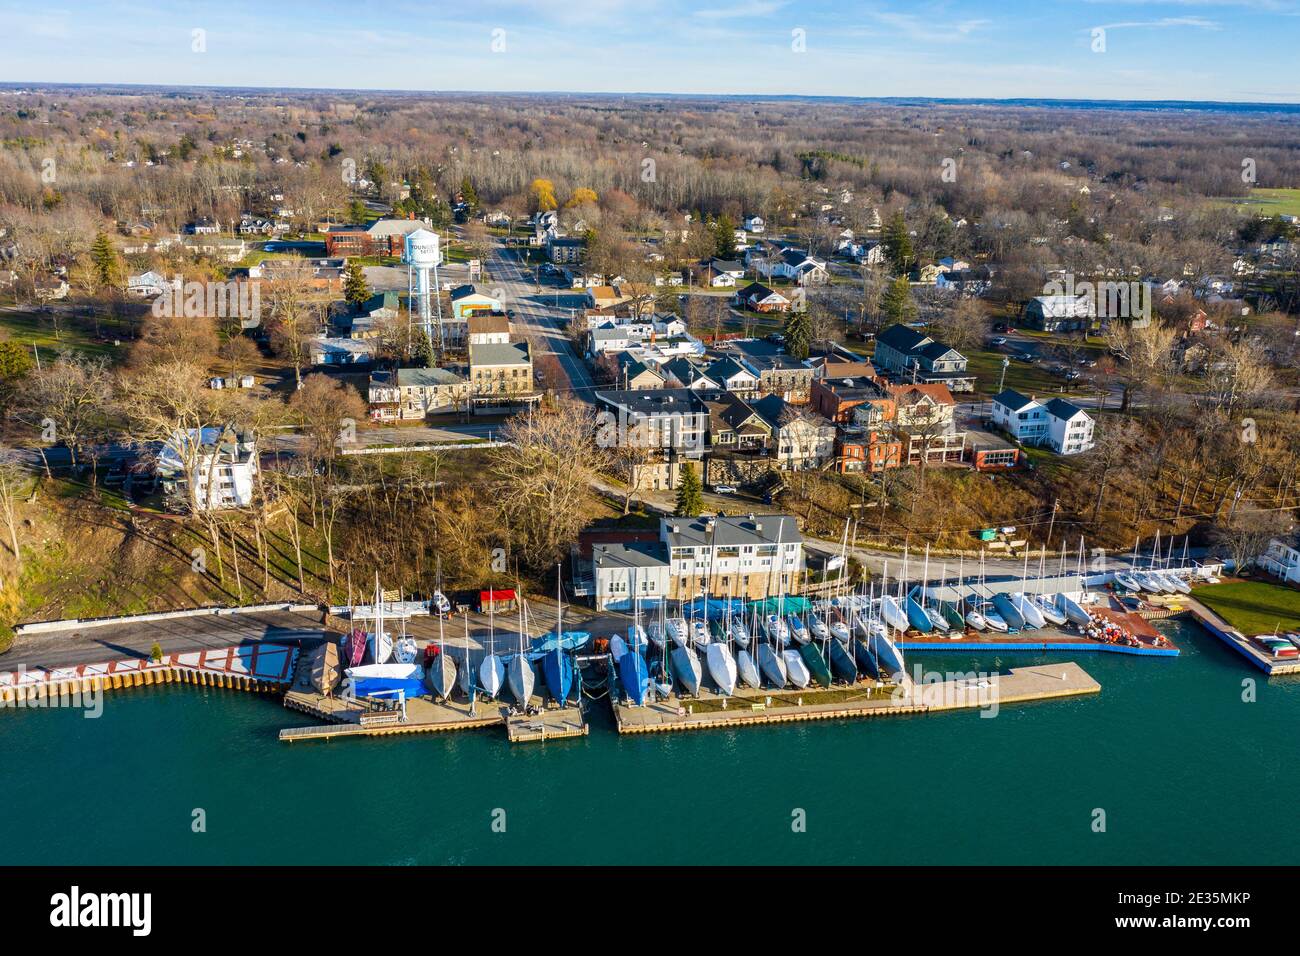 youngstown ny yacht club